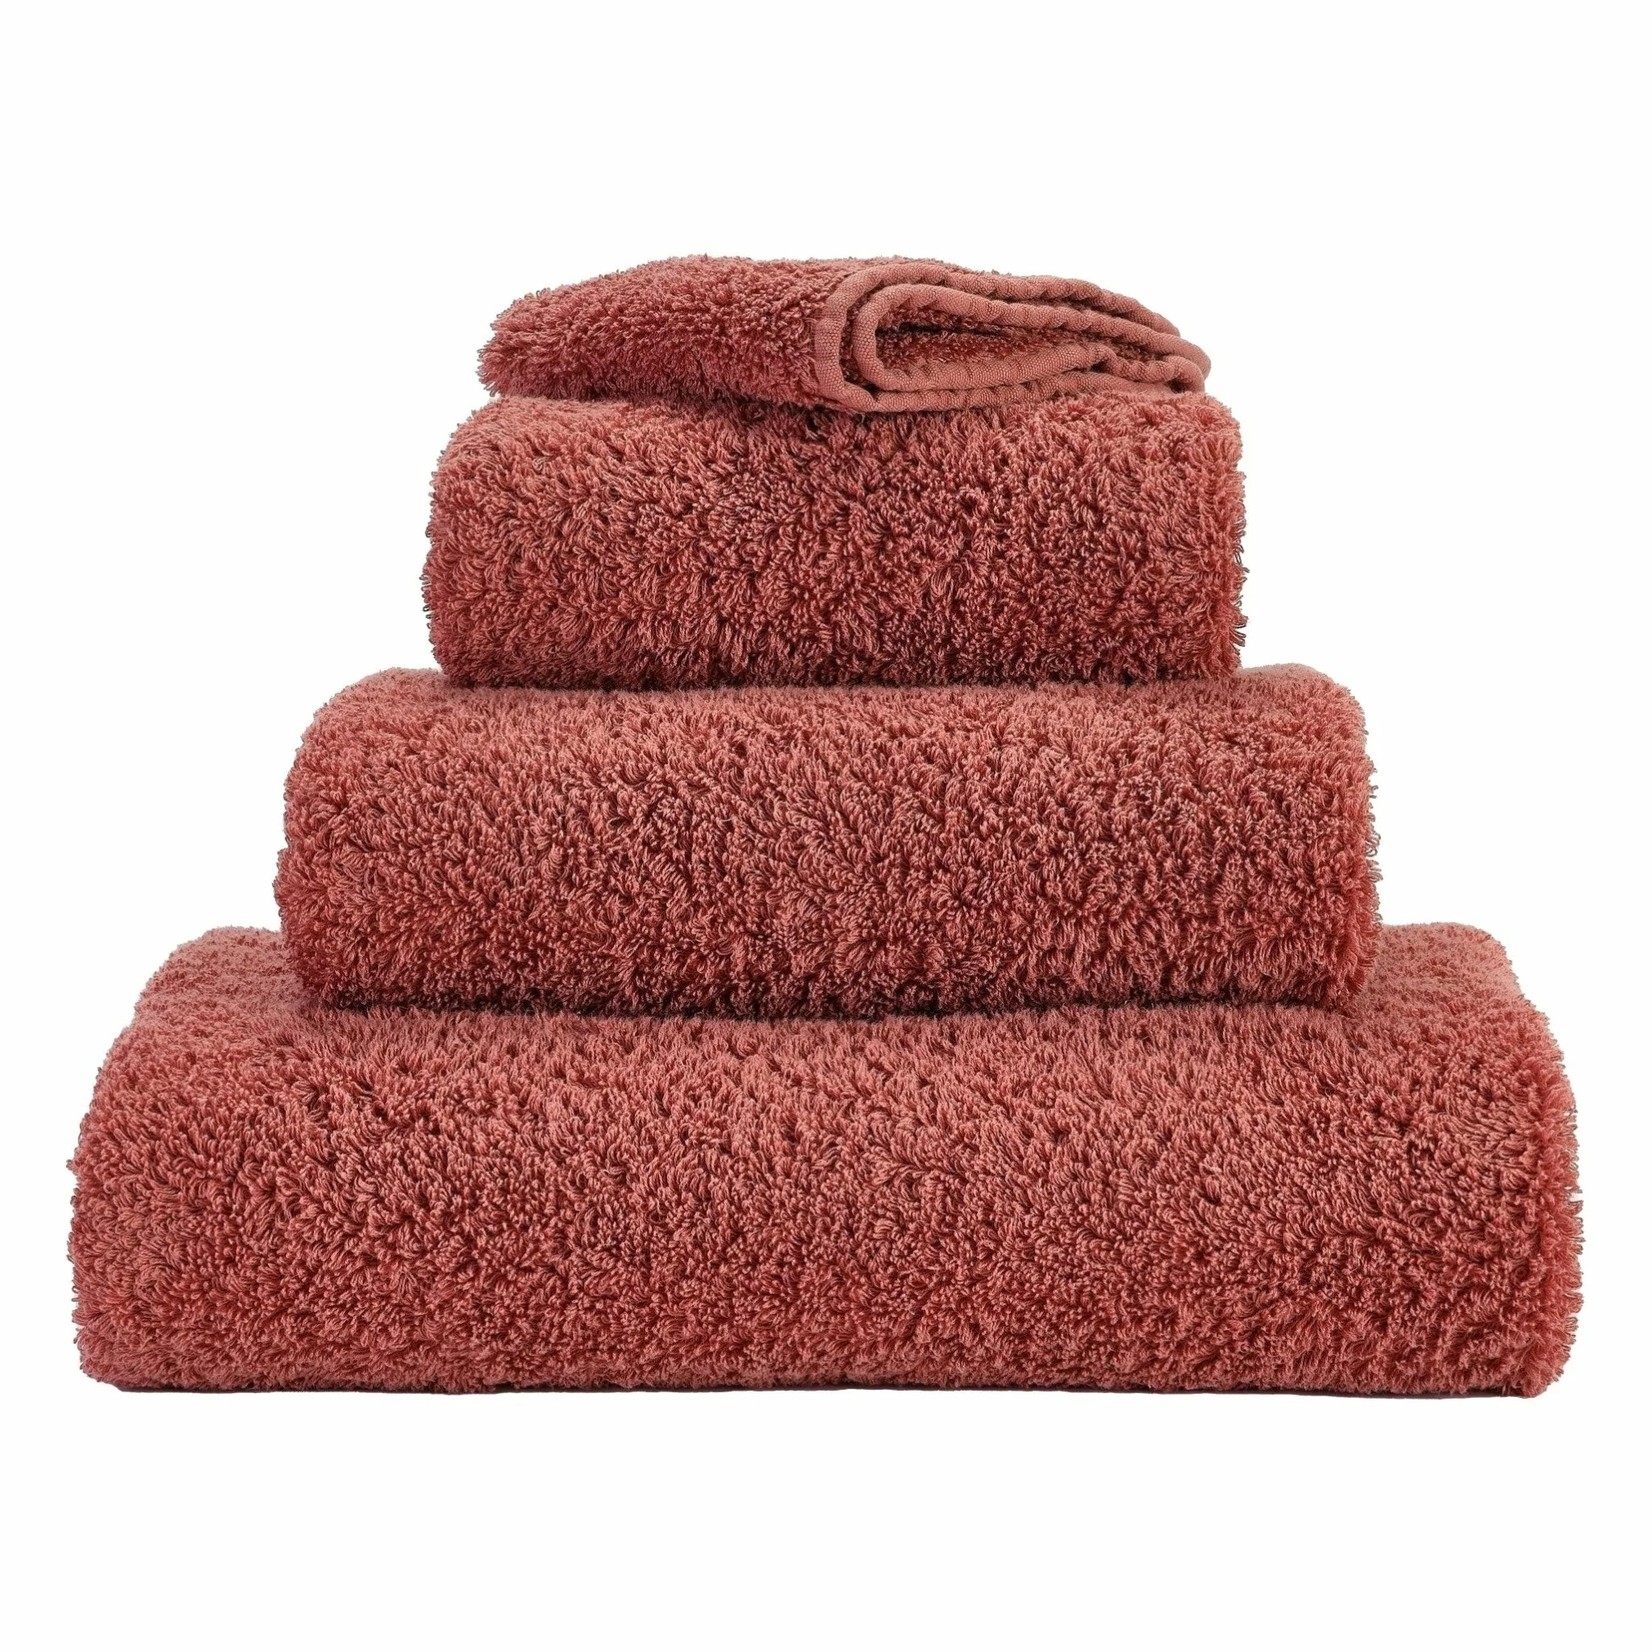 Abyss Abyss Super Pile Towels 519 Sedona